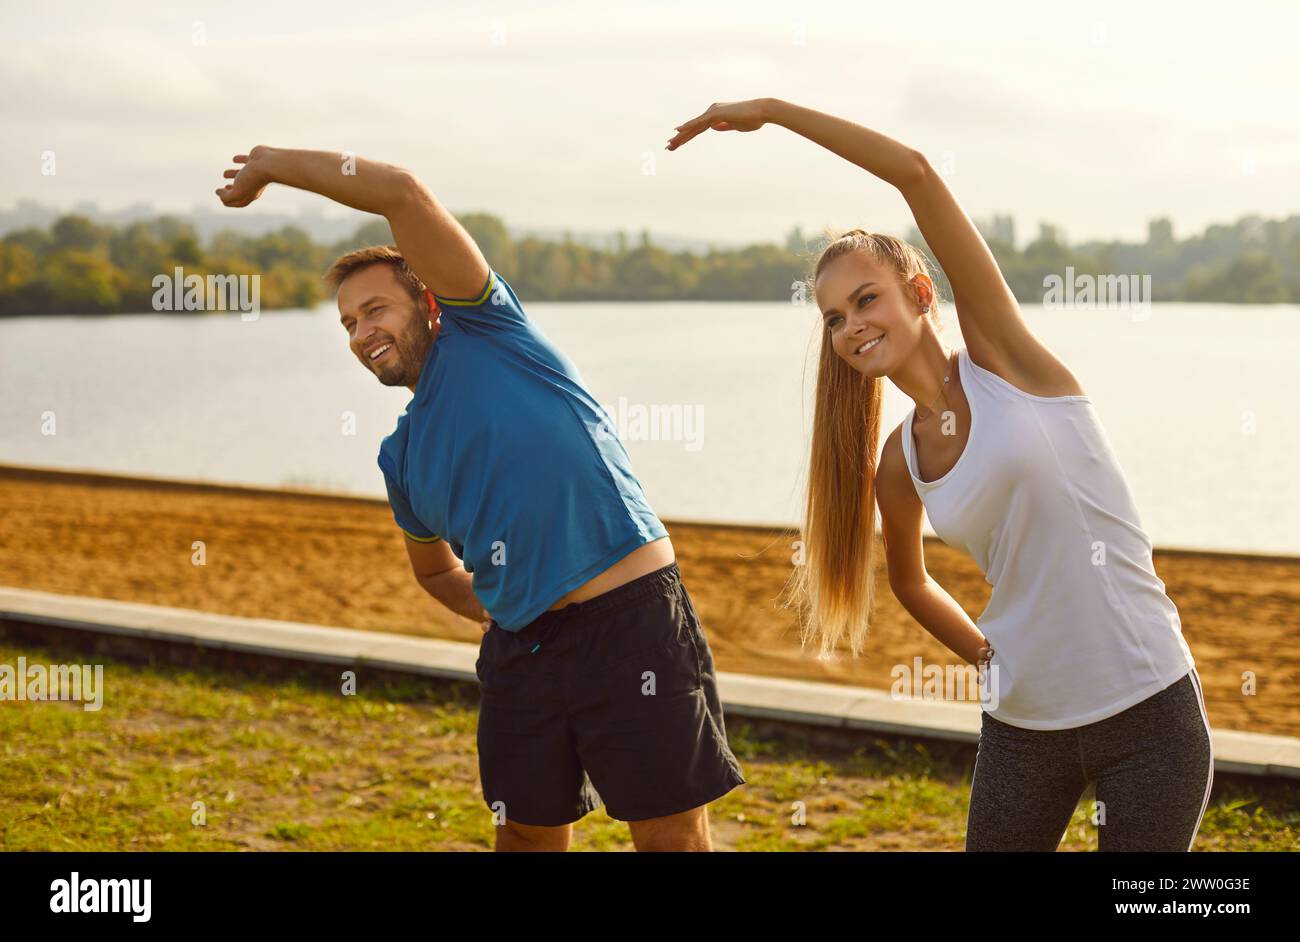 Young fit and active couple doing sport exercising in nature. Outdoors fitness concept. Stock Photo